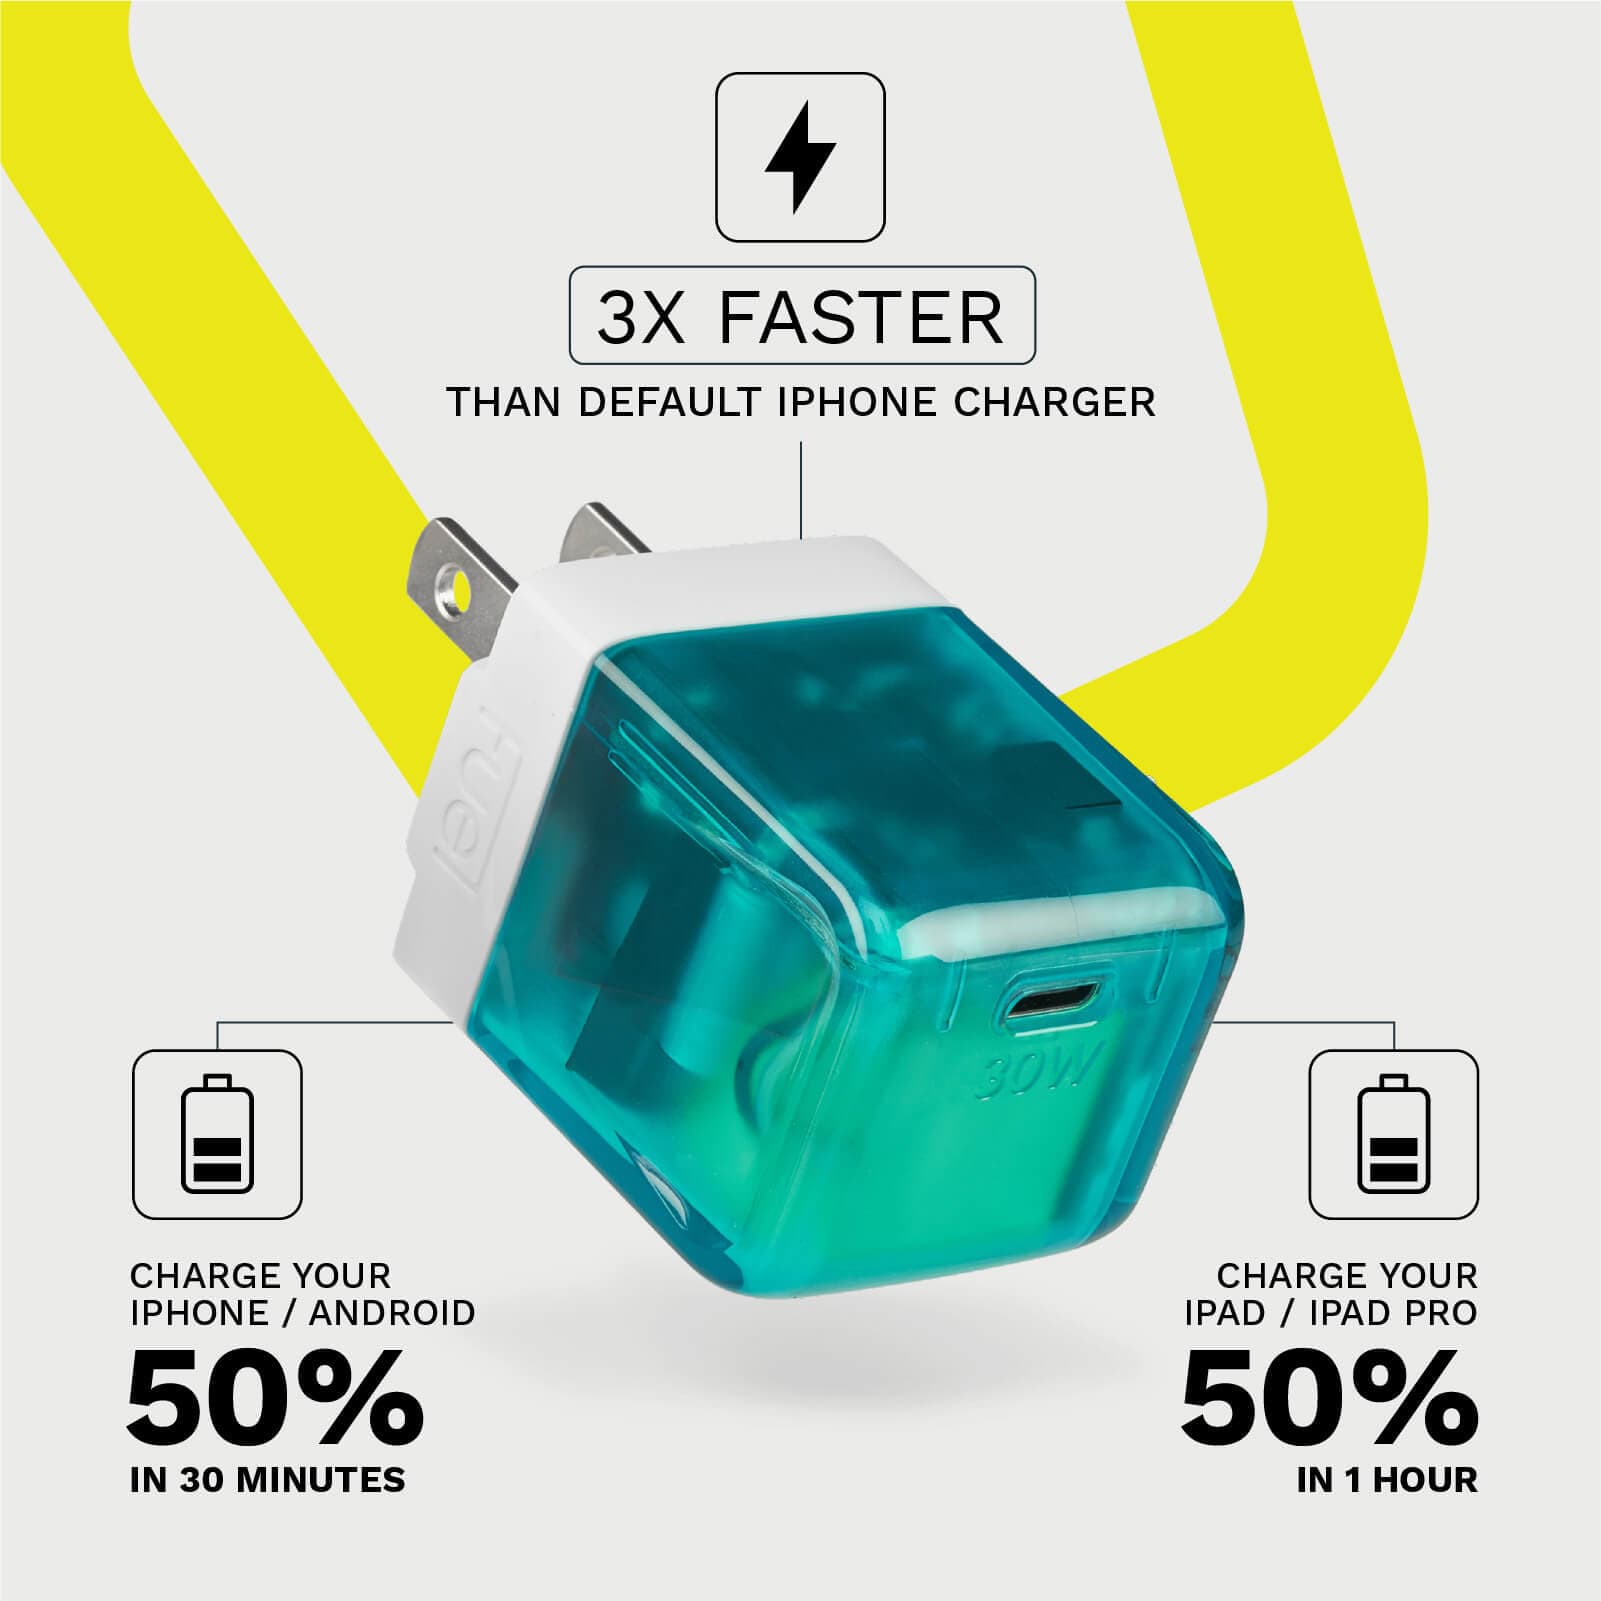 3X FASTER THAN DEFAULT IPHONE CHARGER. CHARGE YOUR IPHONE/ANDROID 50% IN 30 MINUTES OR CHARGE YOUR IPAD 50% IN 1 HOUR